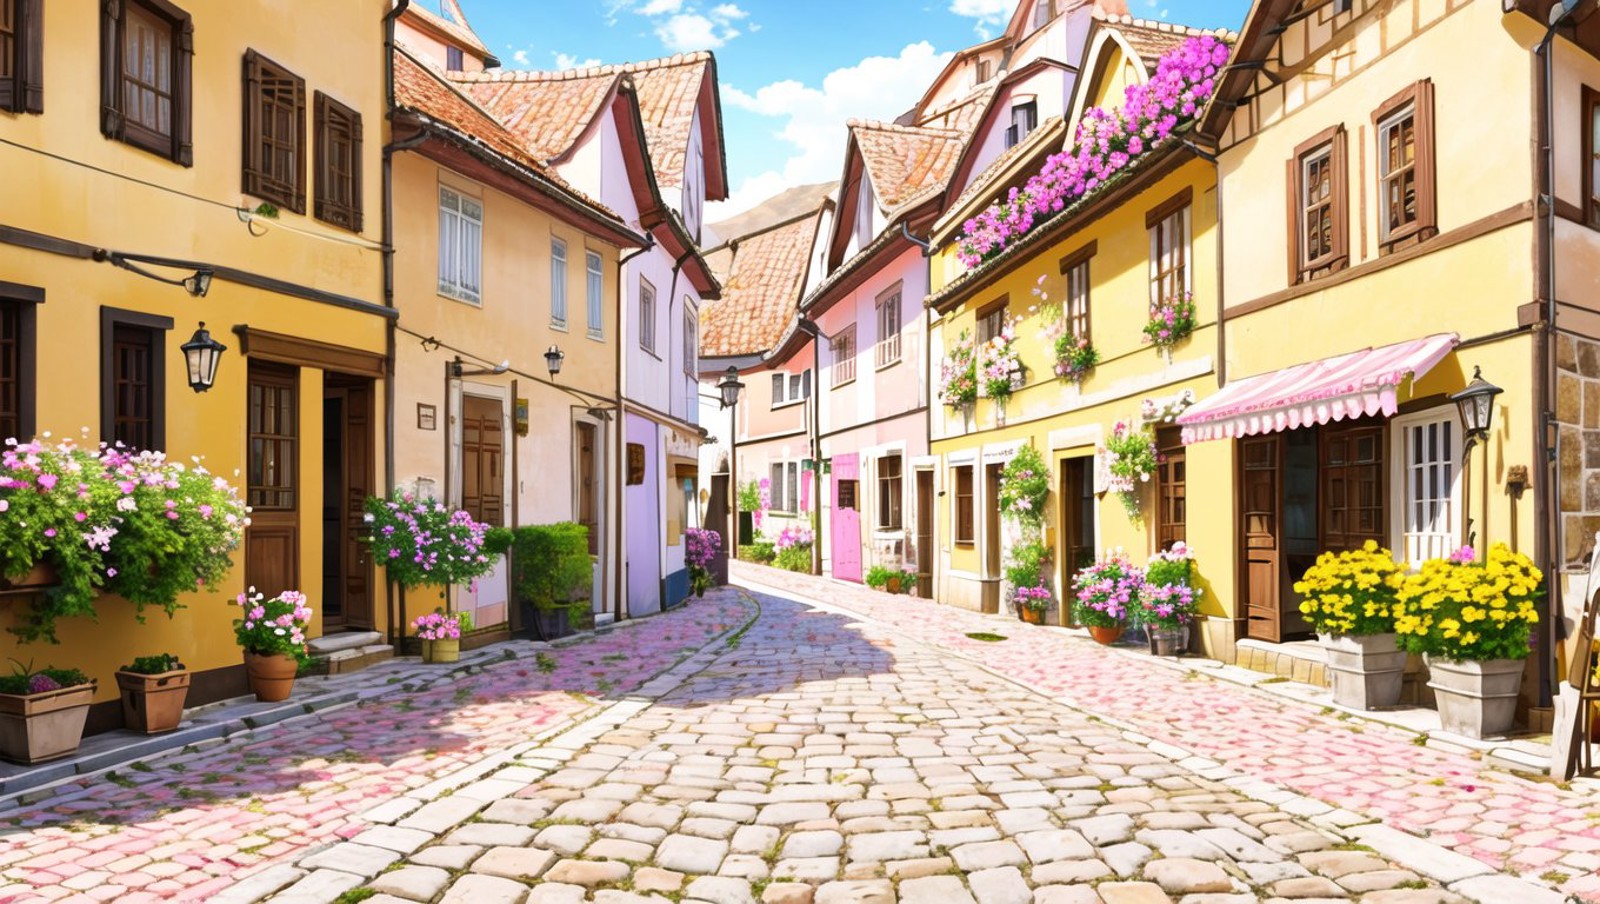 <lora:vn_bg:1> vn_bg,
A charming cobblestone street in an old European town, with pastel-colored houses, blooming flower b...